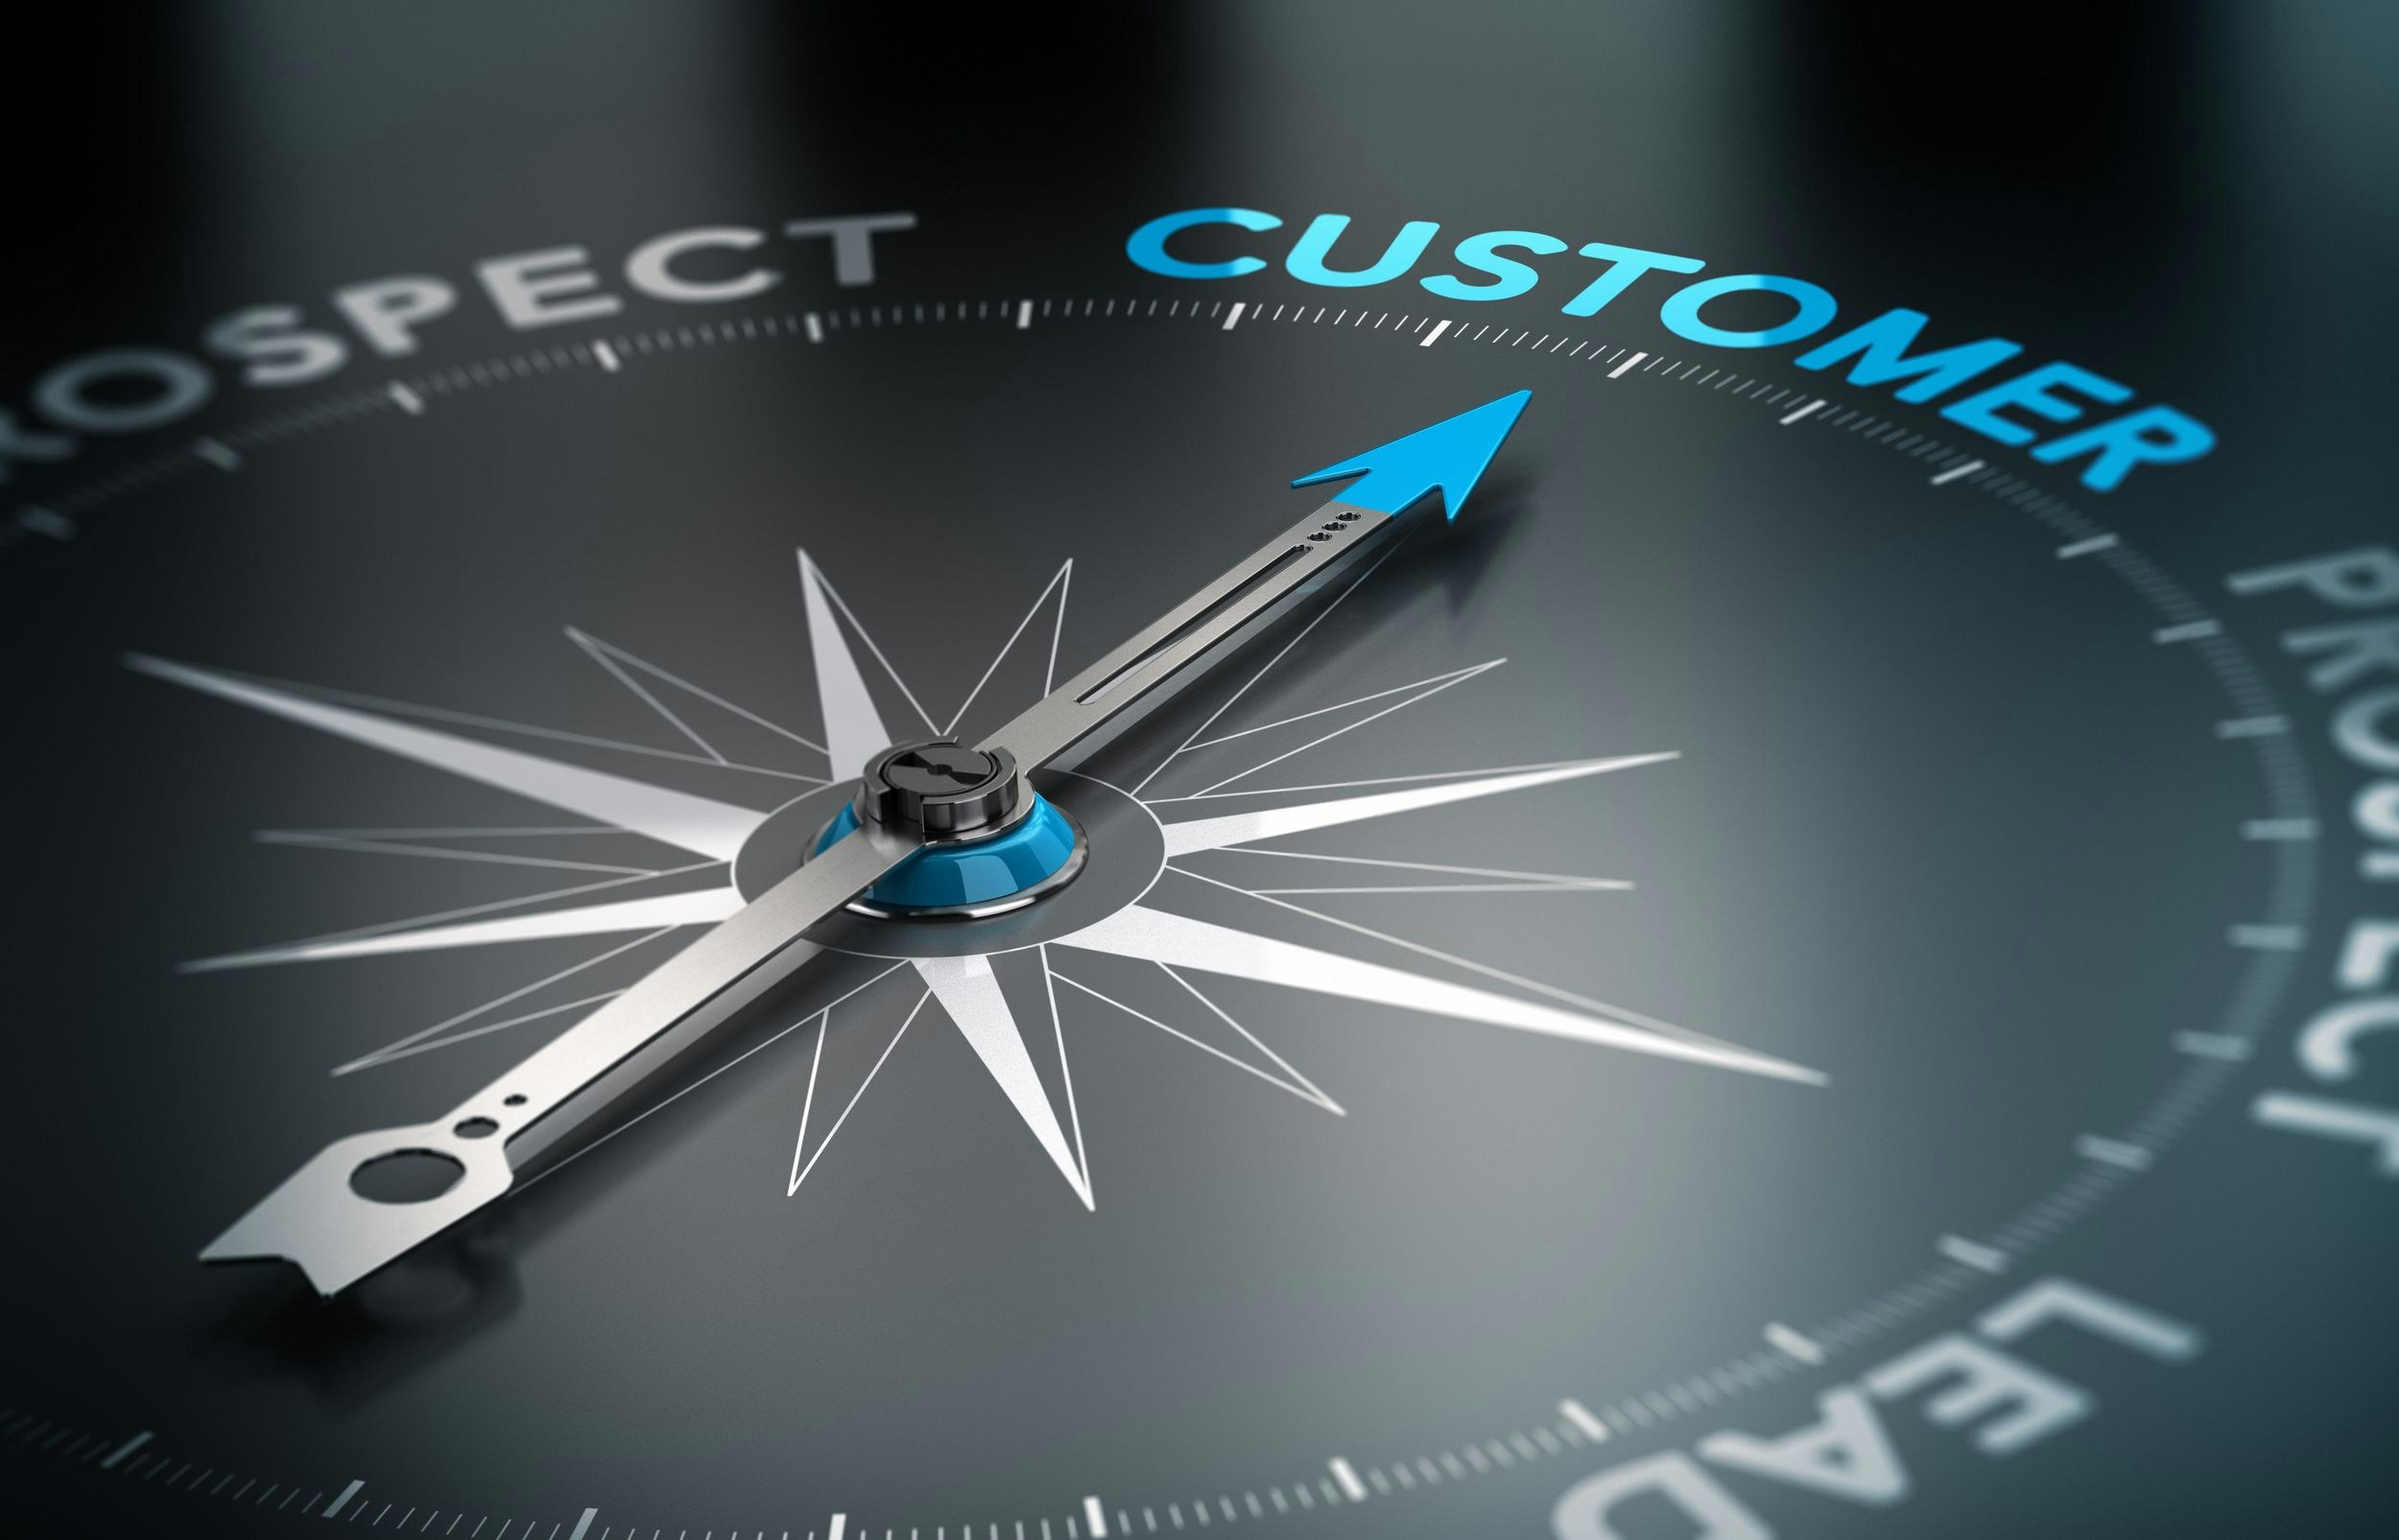 THE BURGEONING OPPORTUNITY FOR VERTICALIZED CUSTOMER ENGAGEMENT